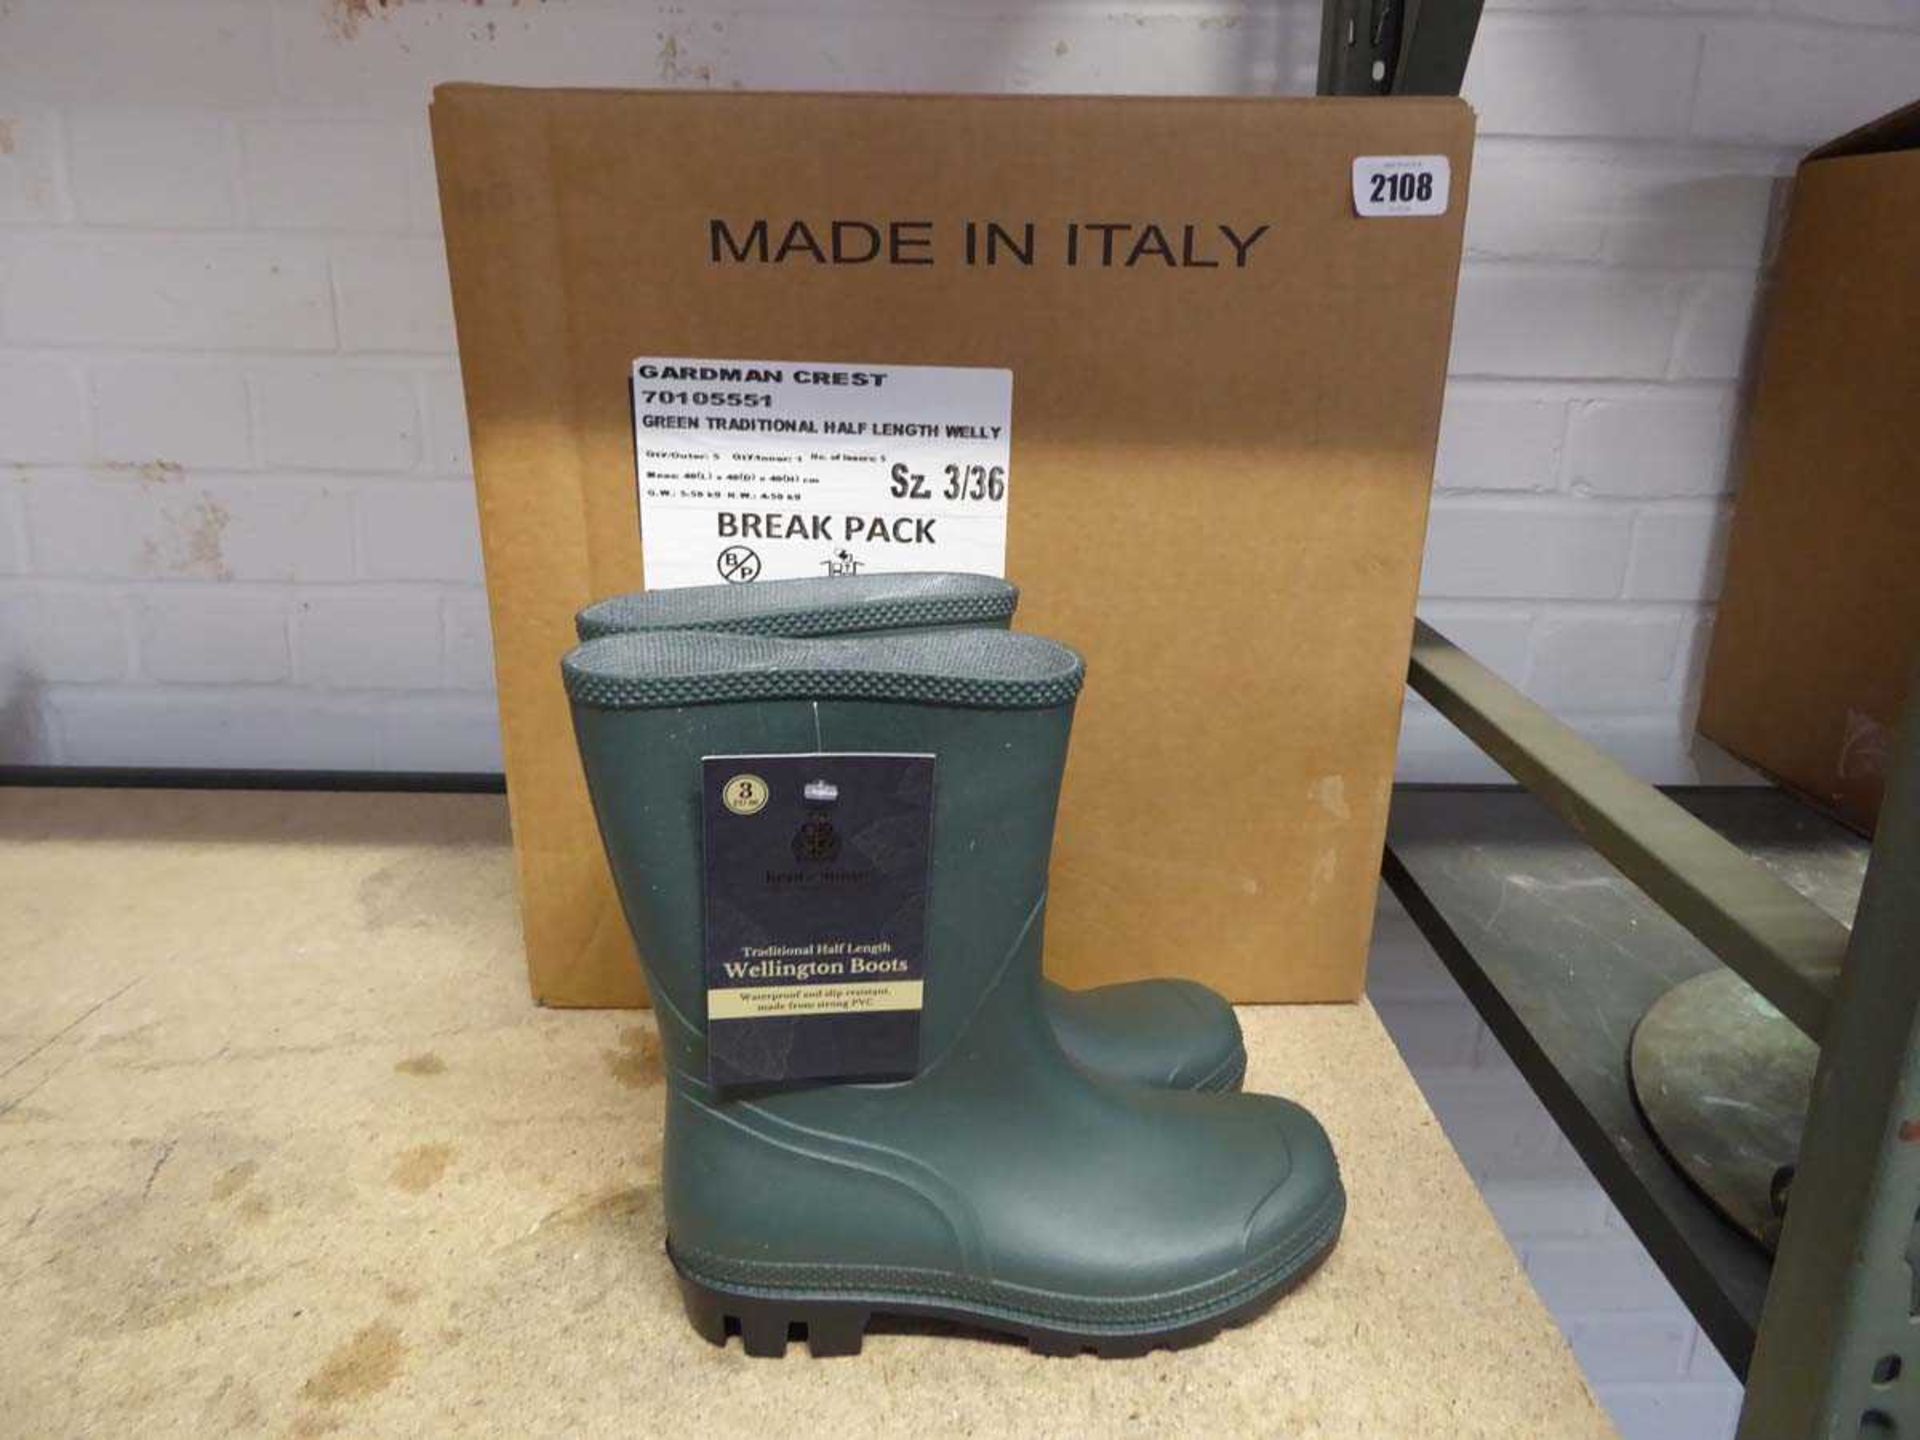 Box containing 5 pairs of Kent & Stowe traditional half length Wellington boots (size 3)